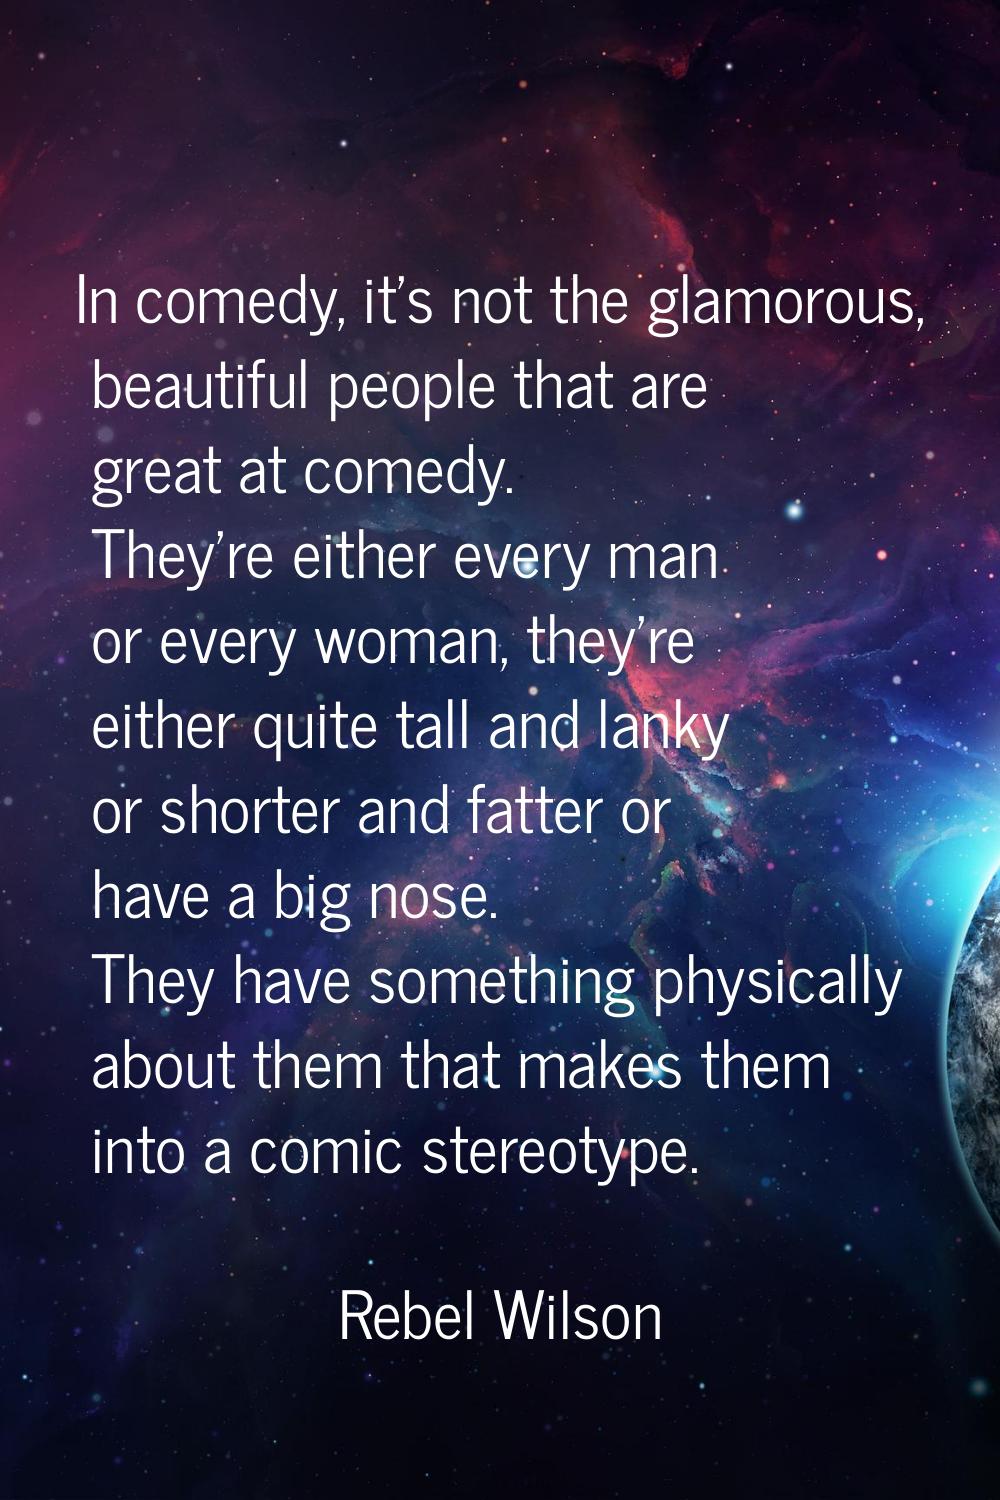 In comedy, it's not the glamorous, beautiful people that are great at comedy. They're either every 